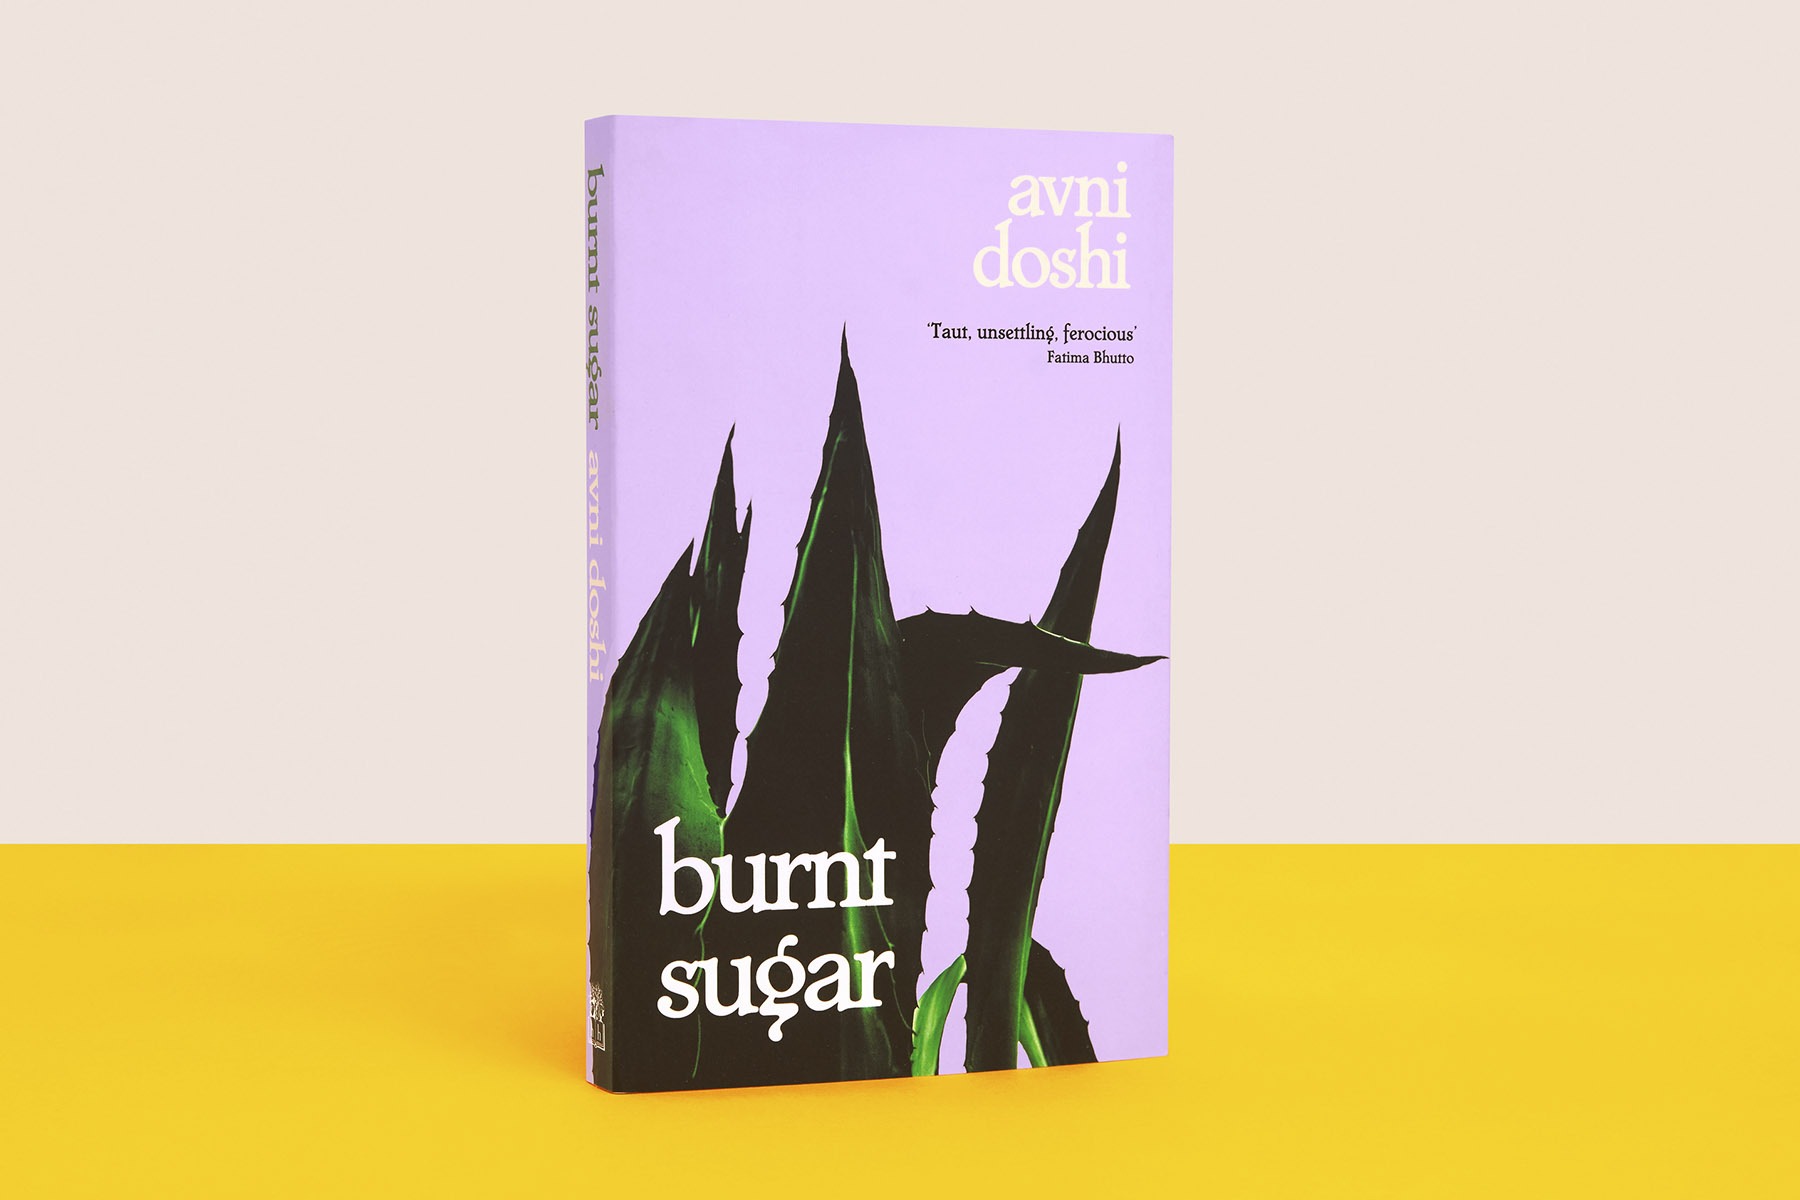 The cover of Burnt Sugar by Avni Doshi.